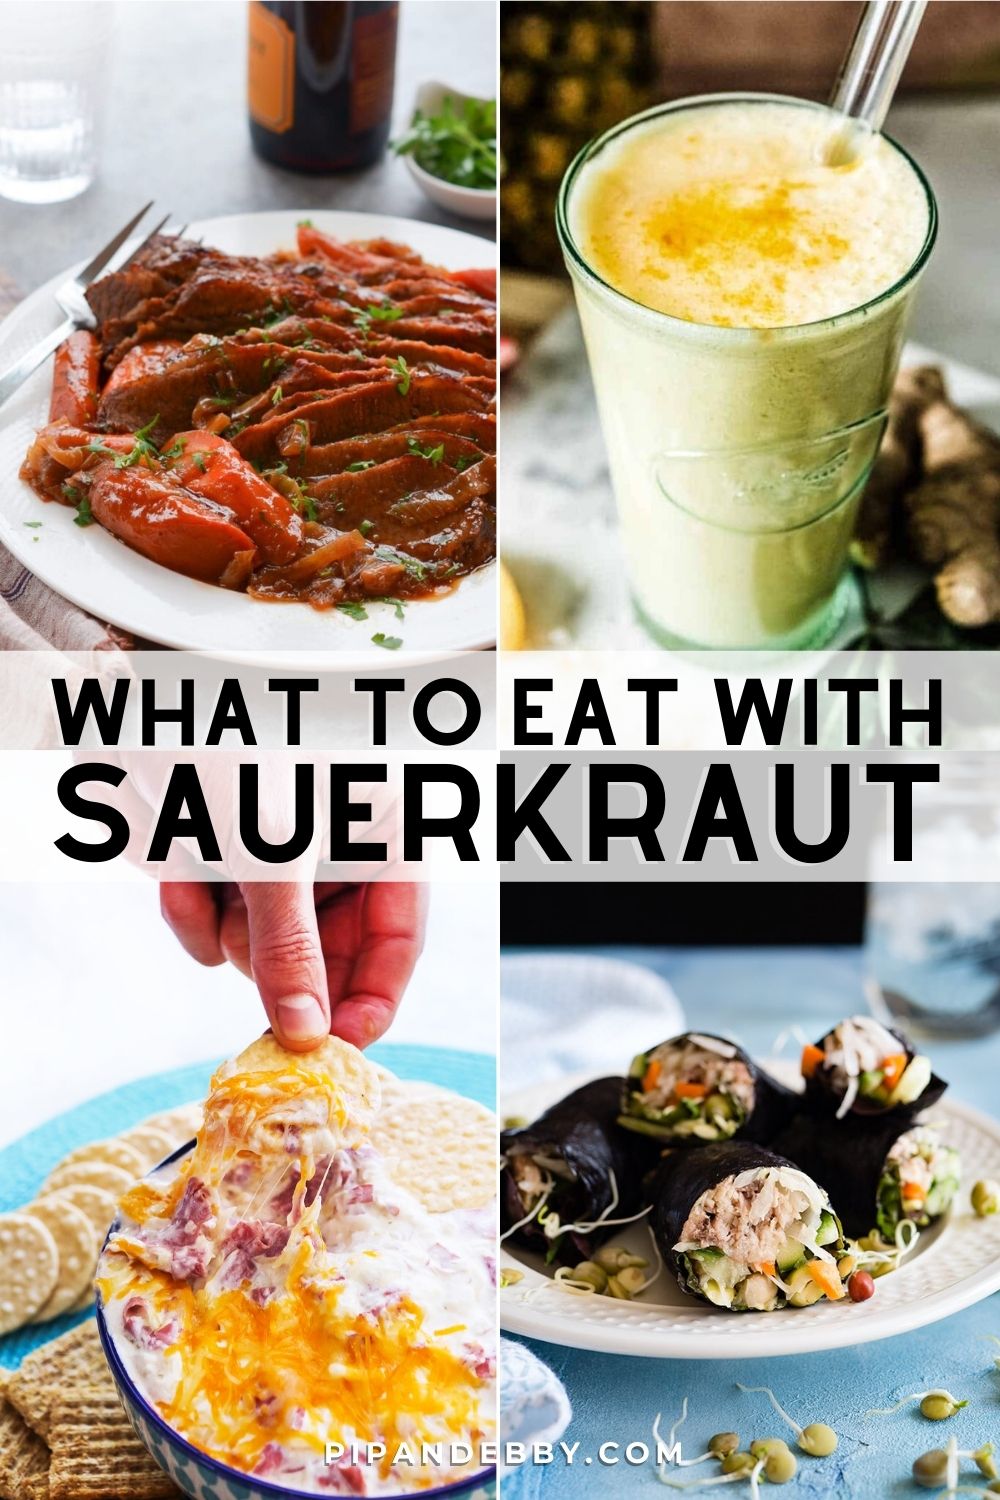 Four food photos in a grid with text overlay reading, "What to eat with sauerkraut."